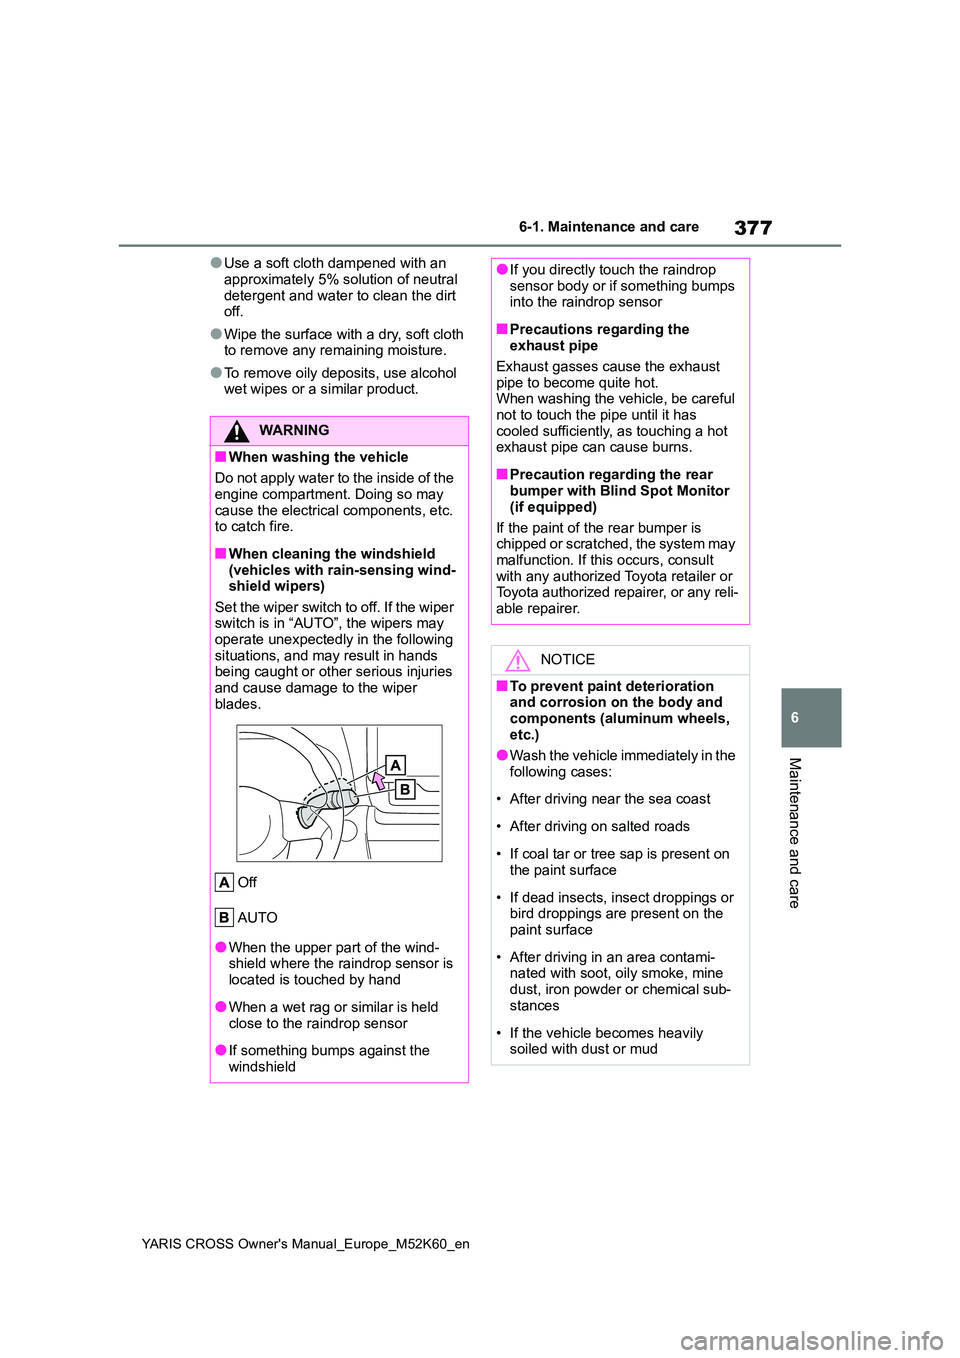 TOYOTA YARIS CROSS 2021 User Guide 377
6
YARIS CROSS Owner's Manual_Europe_M52K60_en
6-1. Maintenance and care
Maintenance and care
●Use a soft cloth dampened with an  
approximately 5% solution of neutral  detergent and water to